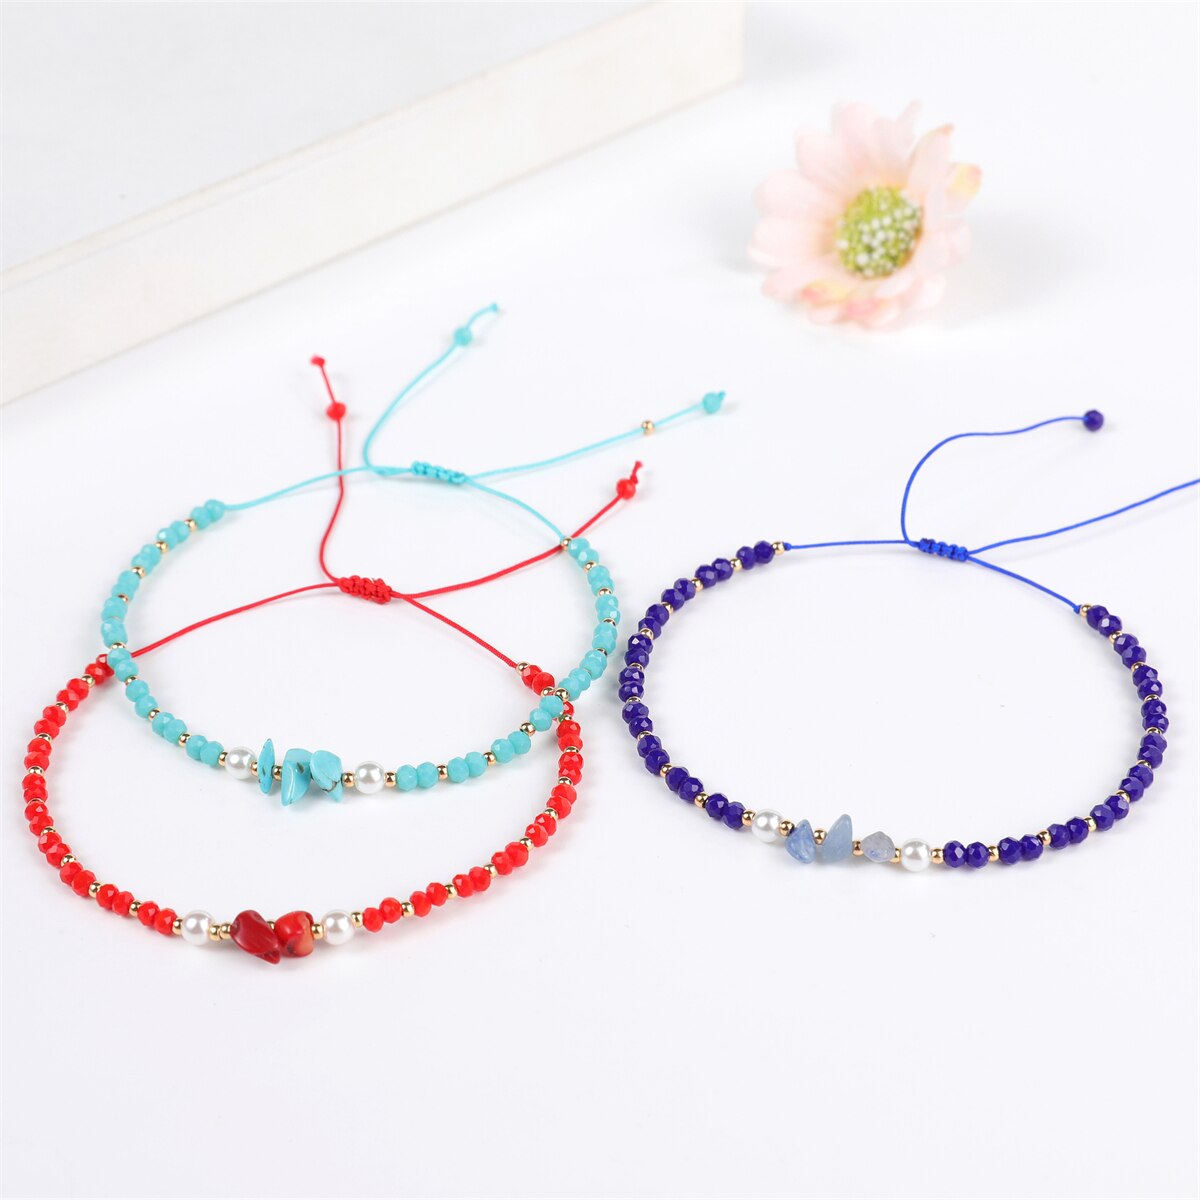 Faceted Crystal Bead Natural Stone Pendant Bracelet Adjustable Hand Woven Bracelet for Women Men Suitable Gifts Party Jewelry